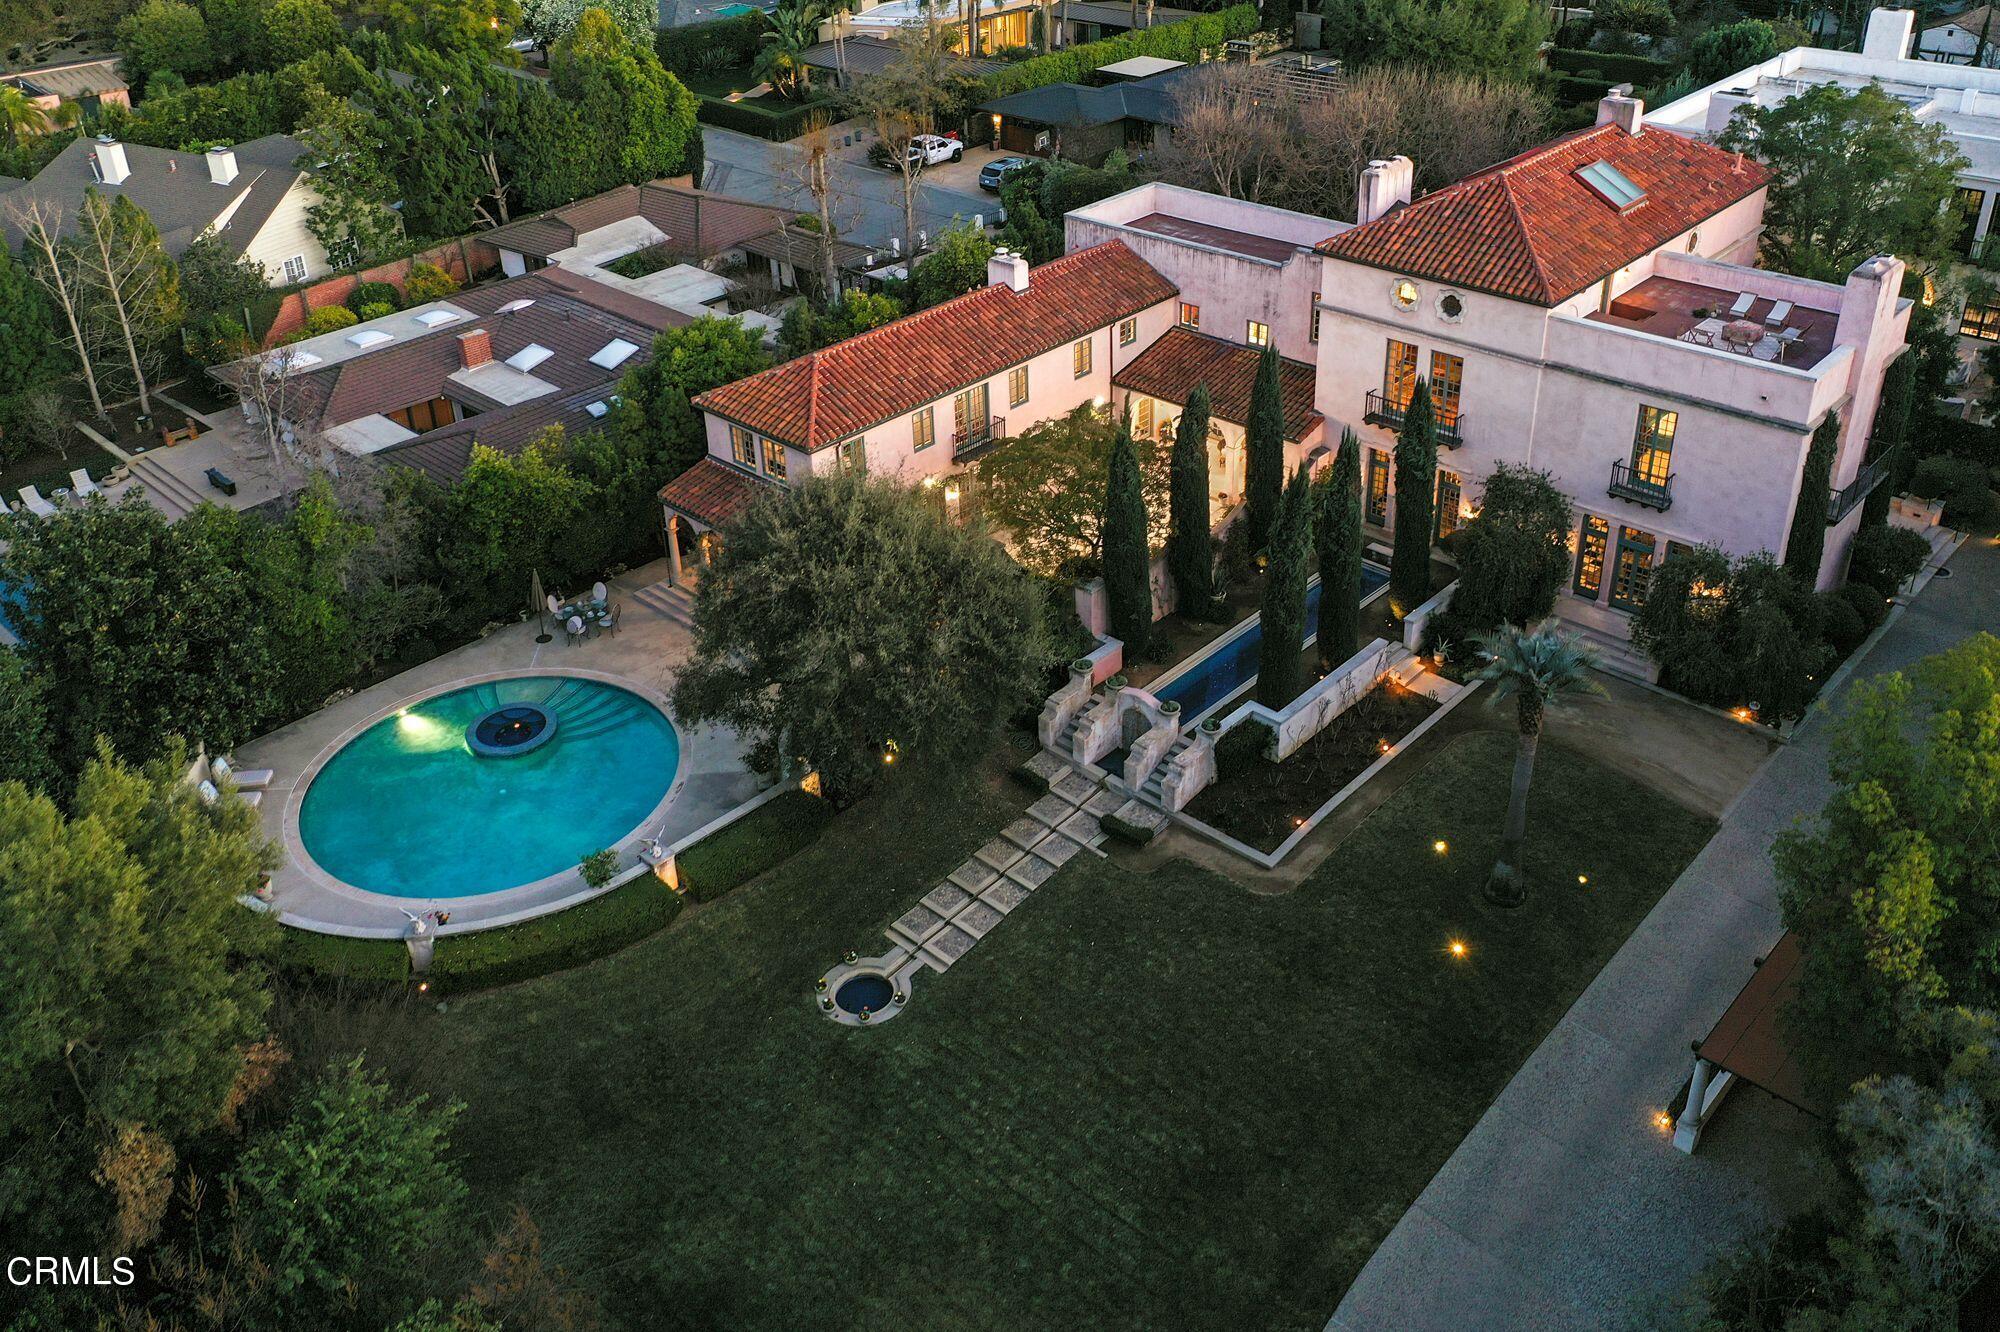 an aerial view of a house with garden space lake and outdoor seating